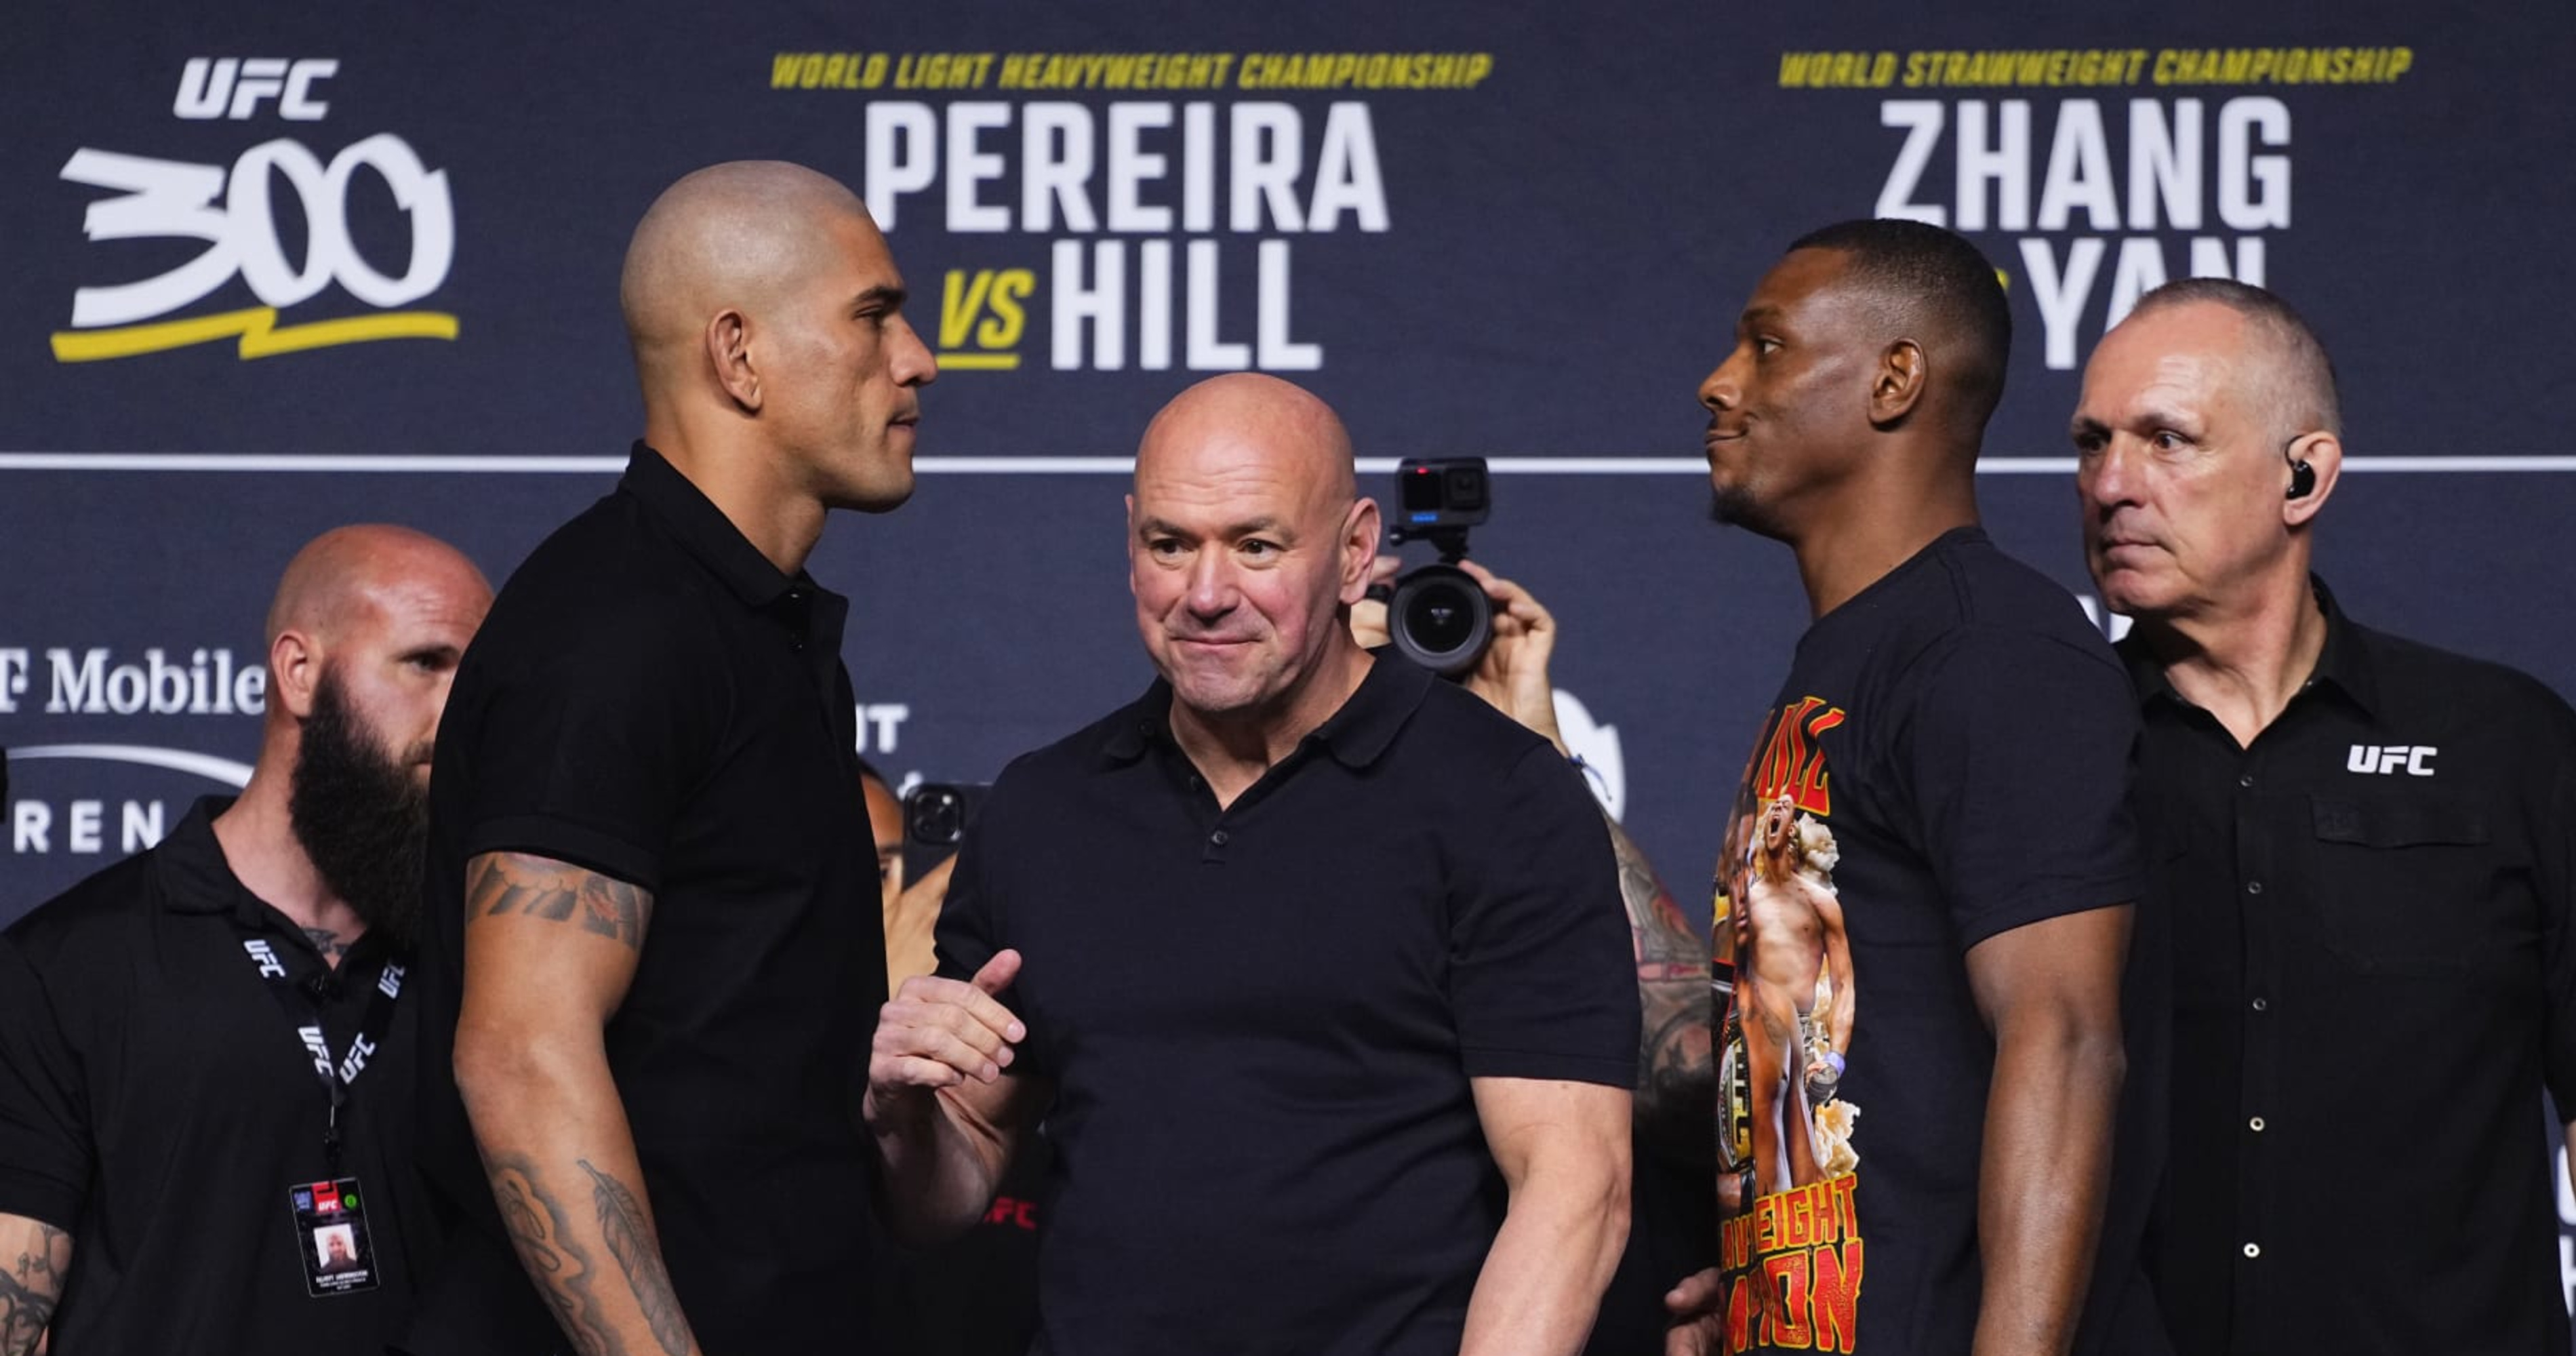 UFC 300 Fight Card: PPV Schedule, Odds and Predict